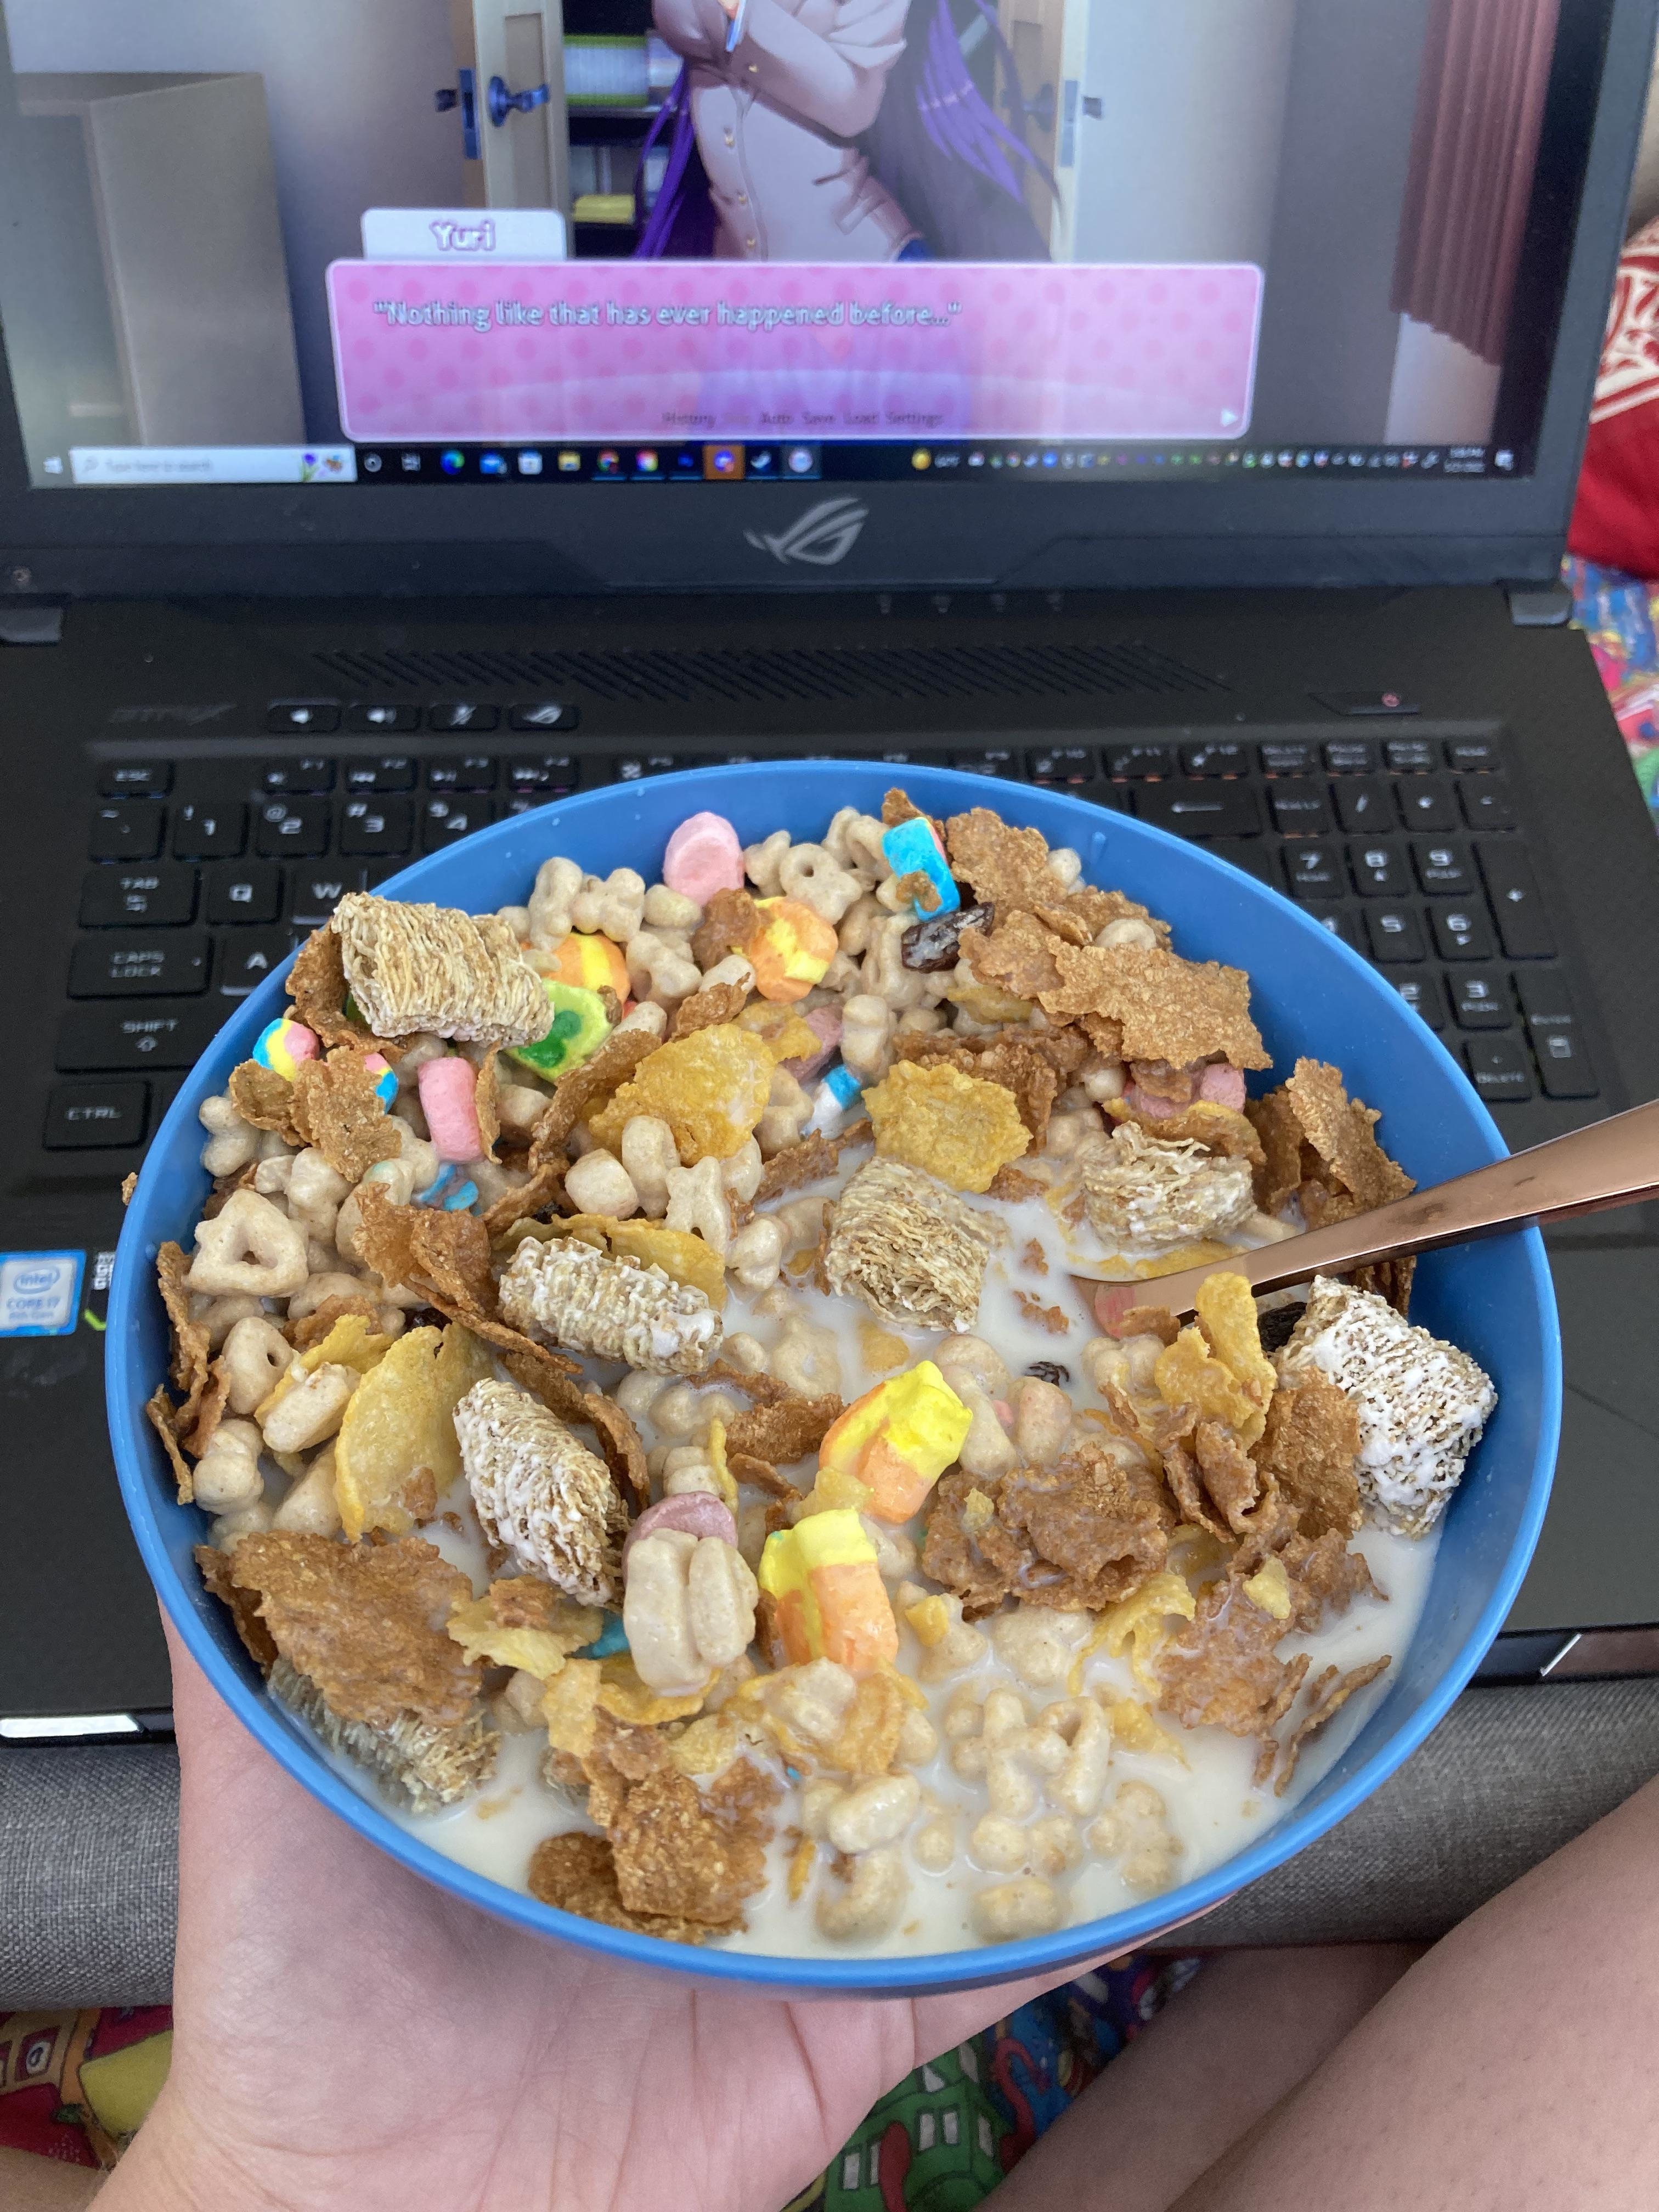 A person holding a bowl of cereal with. milk in front of a laptop screen